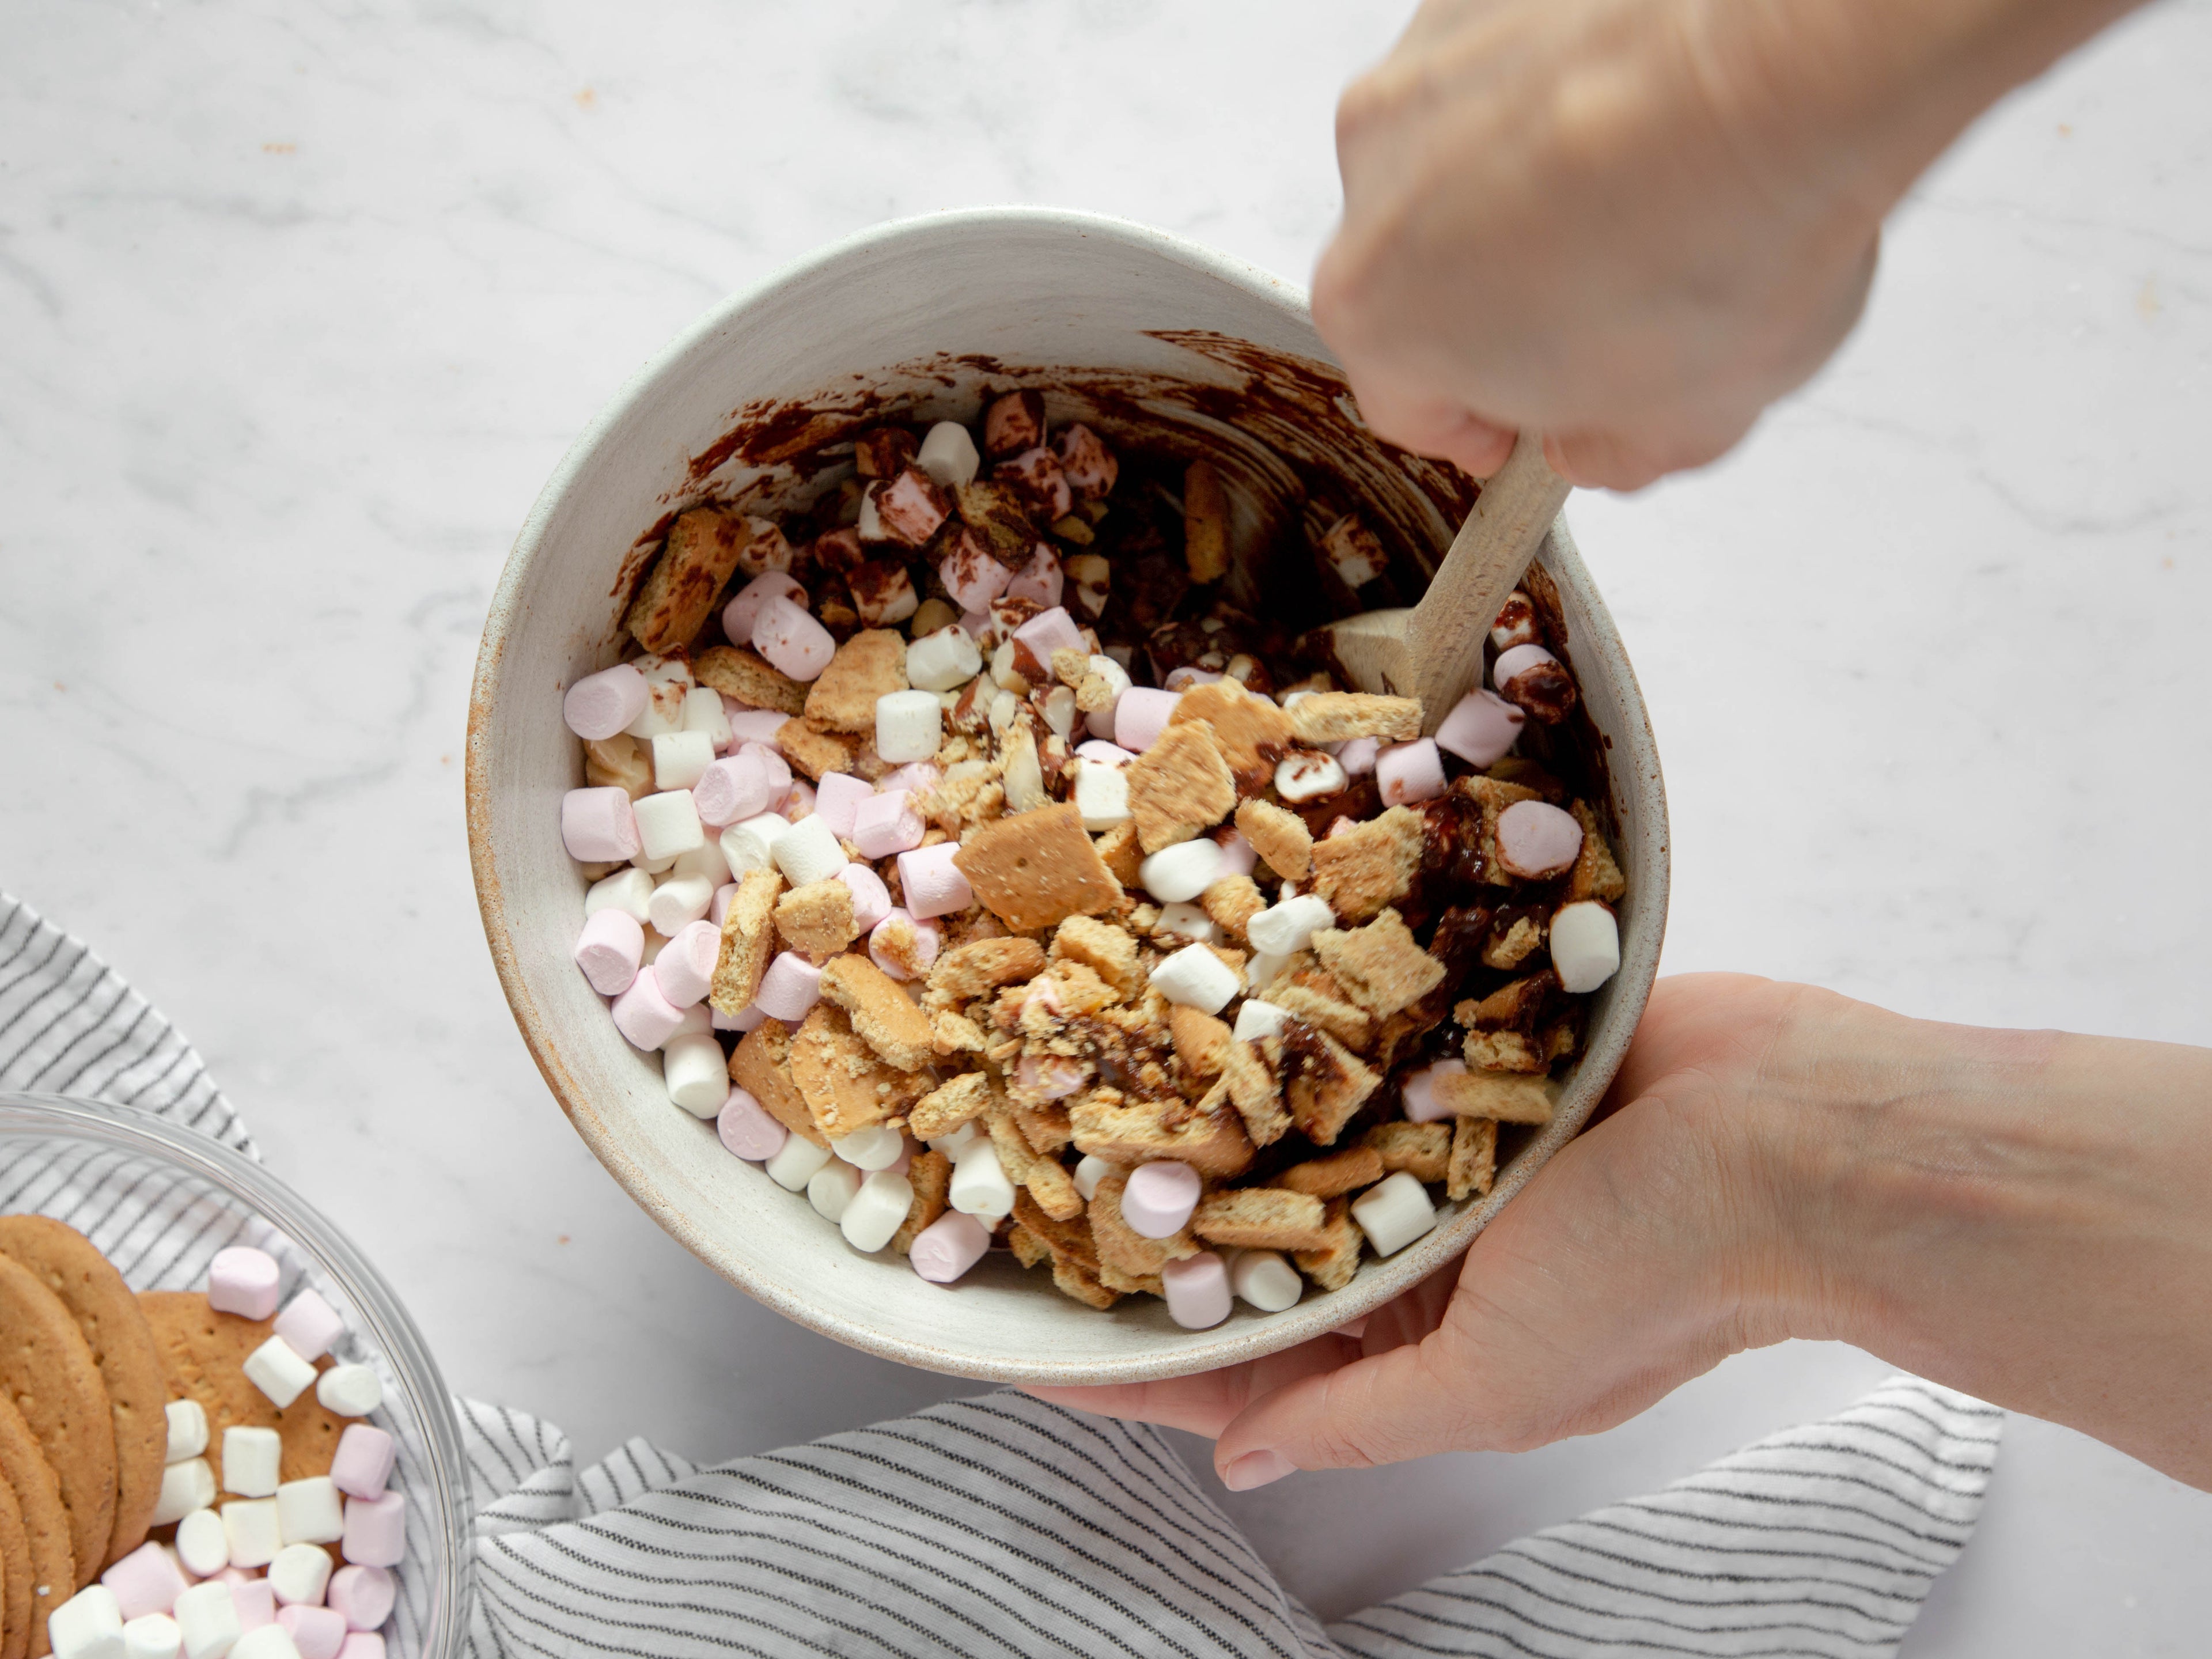 Hand holding a bowl and stirring rocky road ingredients in it with a wooden spoon. Striped tea towel in forefront with another bowl of ingredients